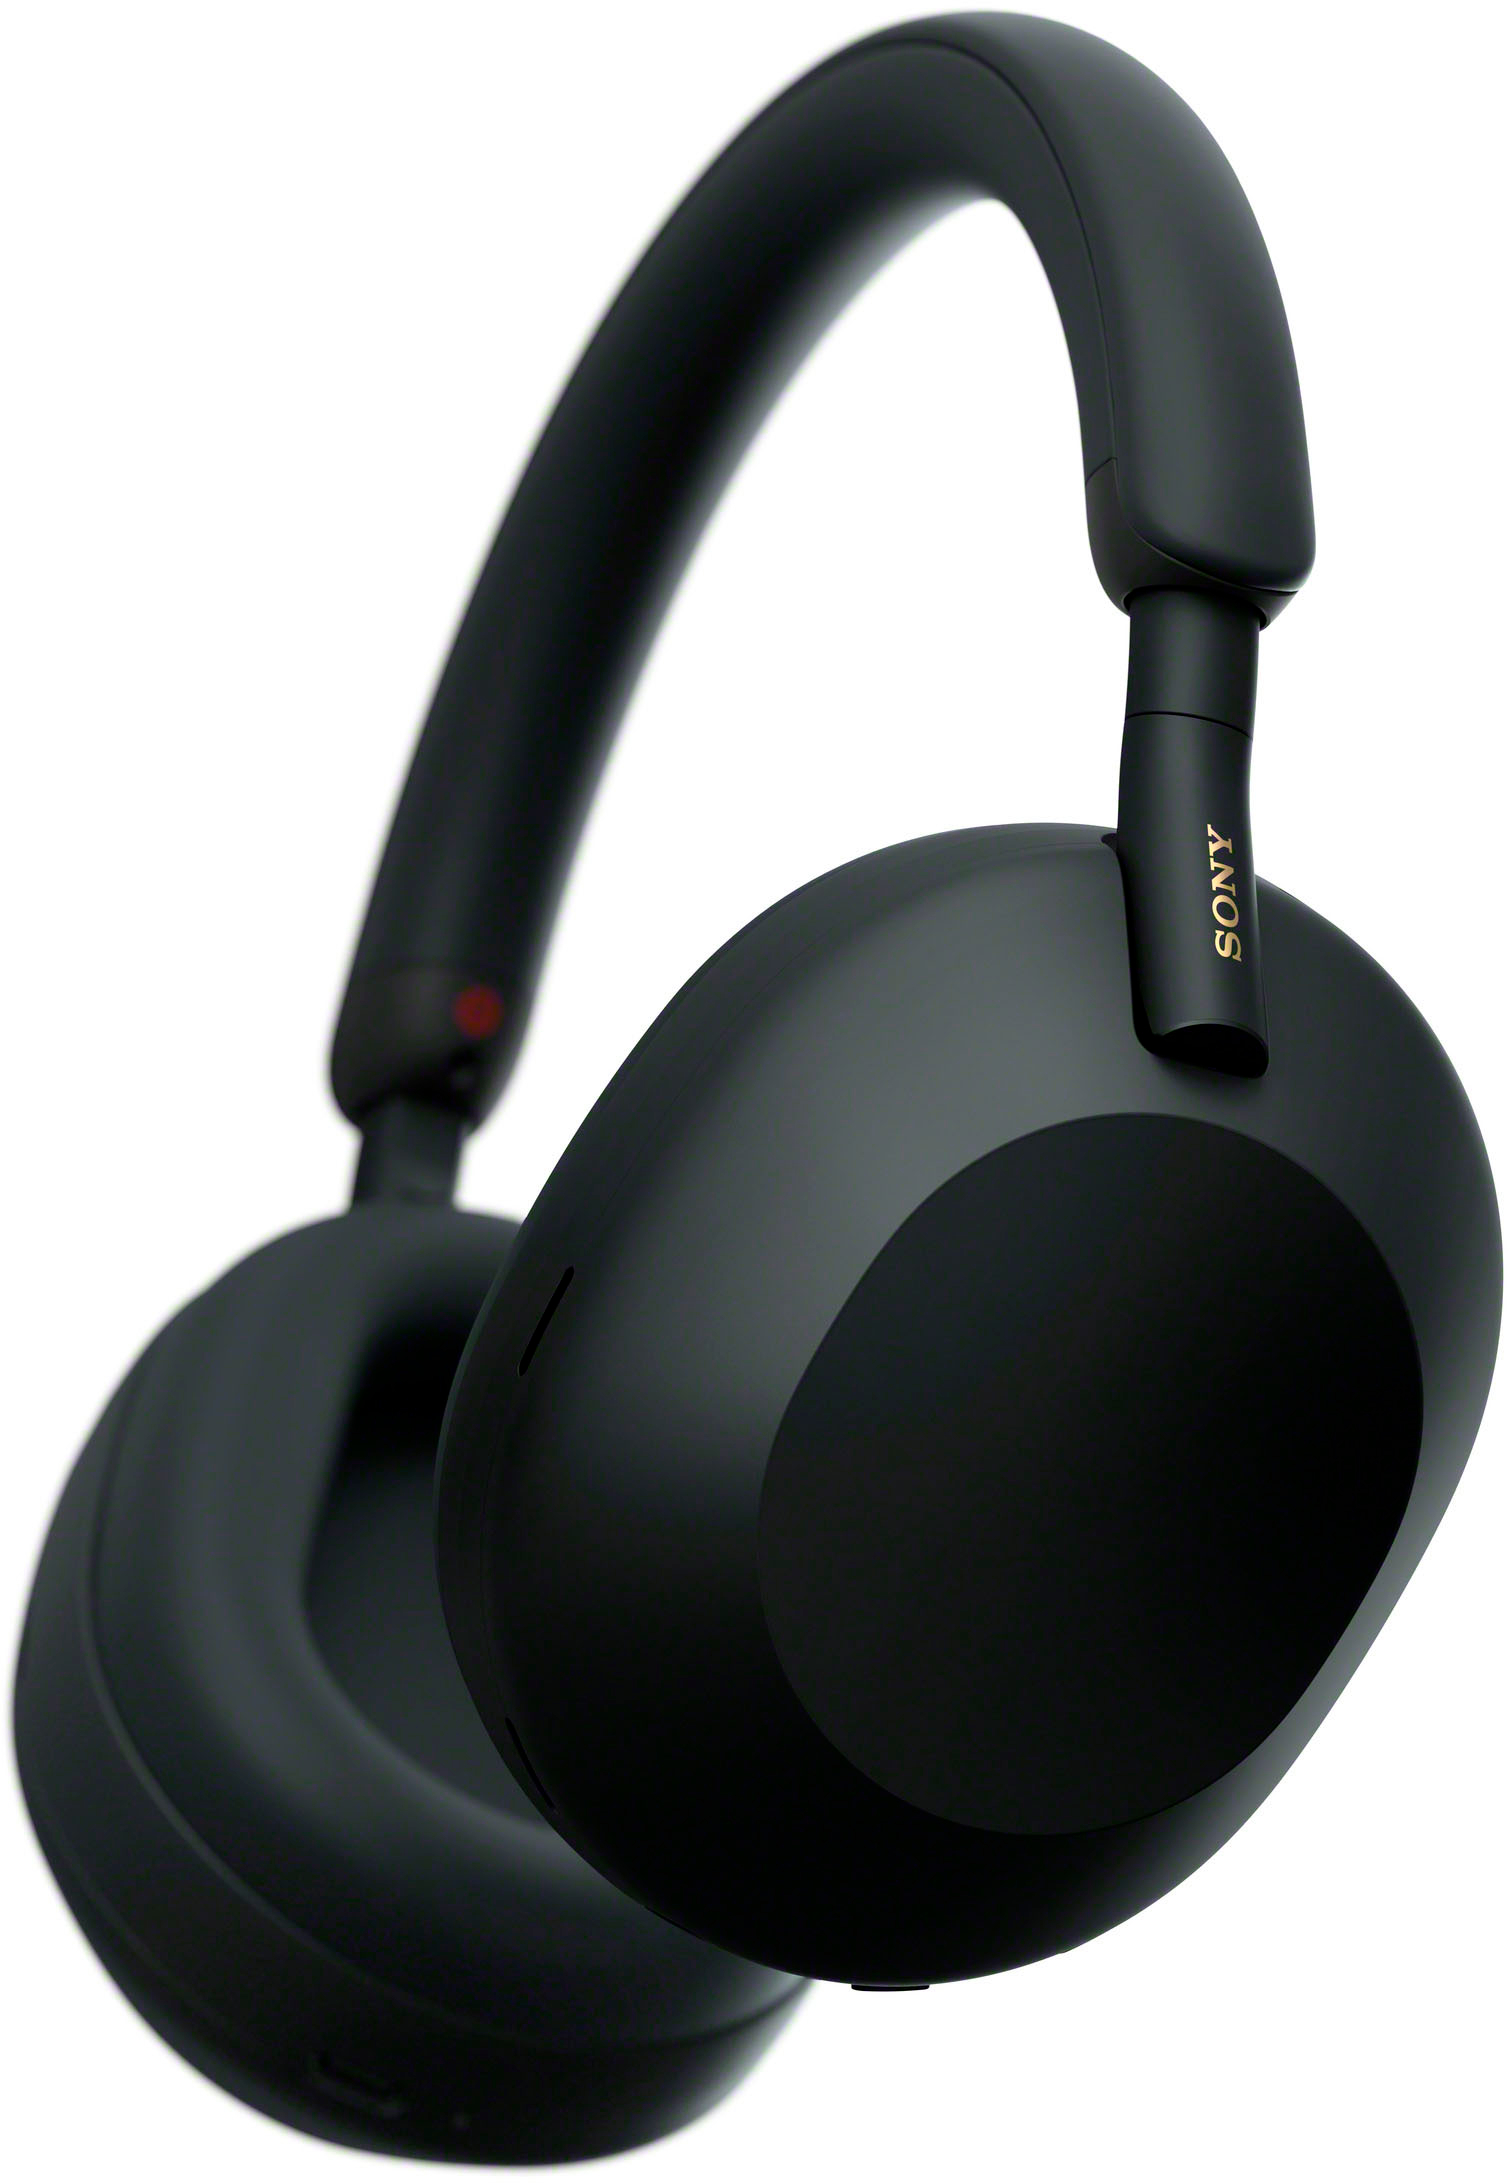 Sony WH-1000XM5 Wireless Bluetooth Noise Canceling Over-Ear Headphones - $348